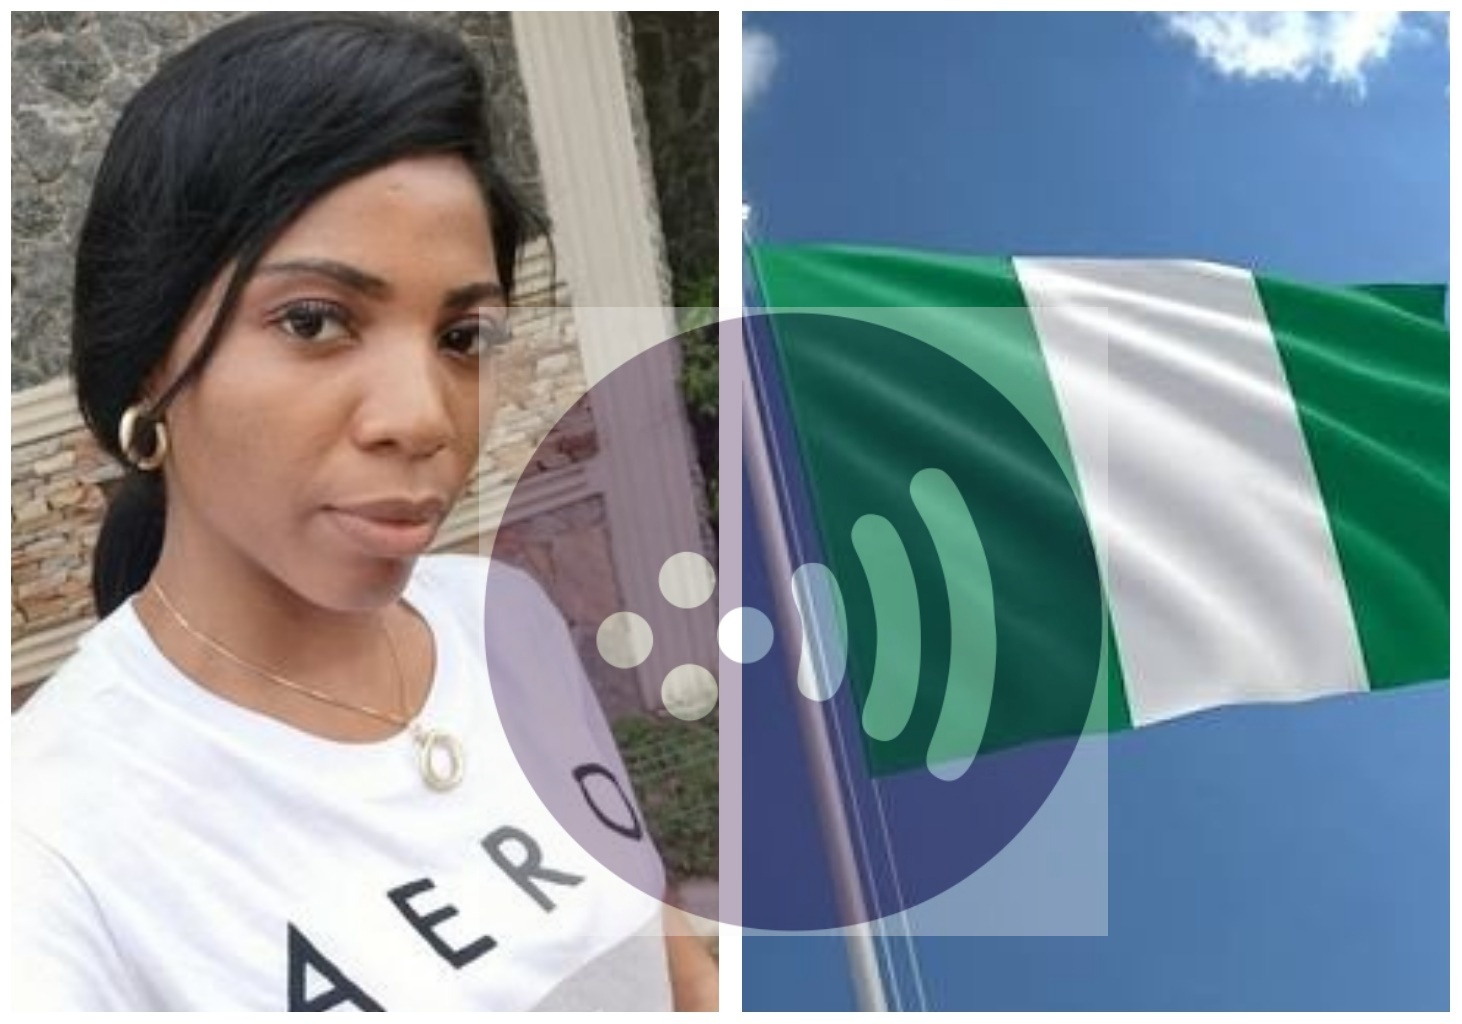 "My company send me 185k monthly since Lockdown began, leave Nigeria if you can" – Nigeria lady in diaspora advise